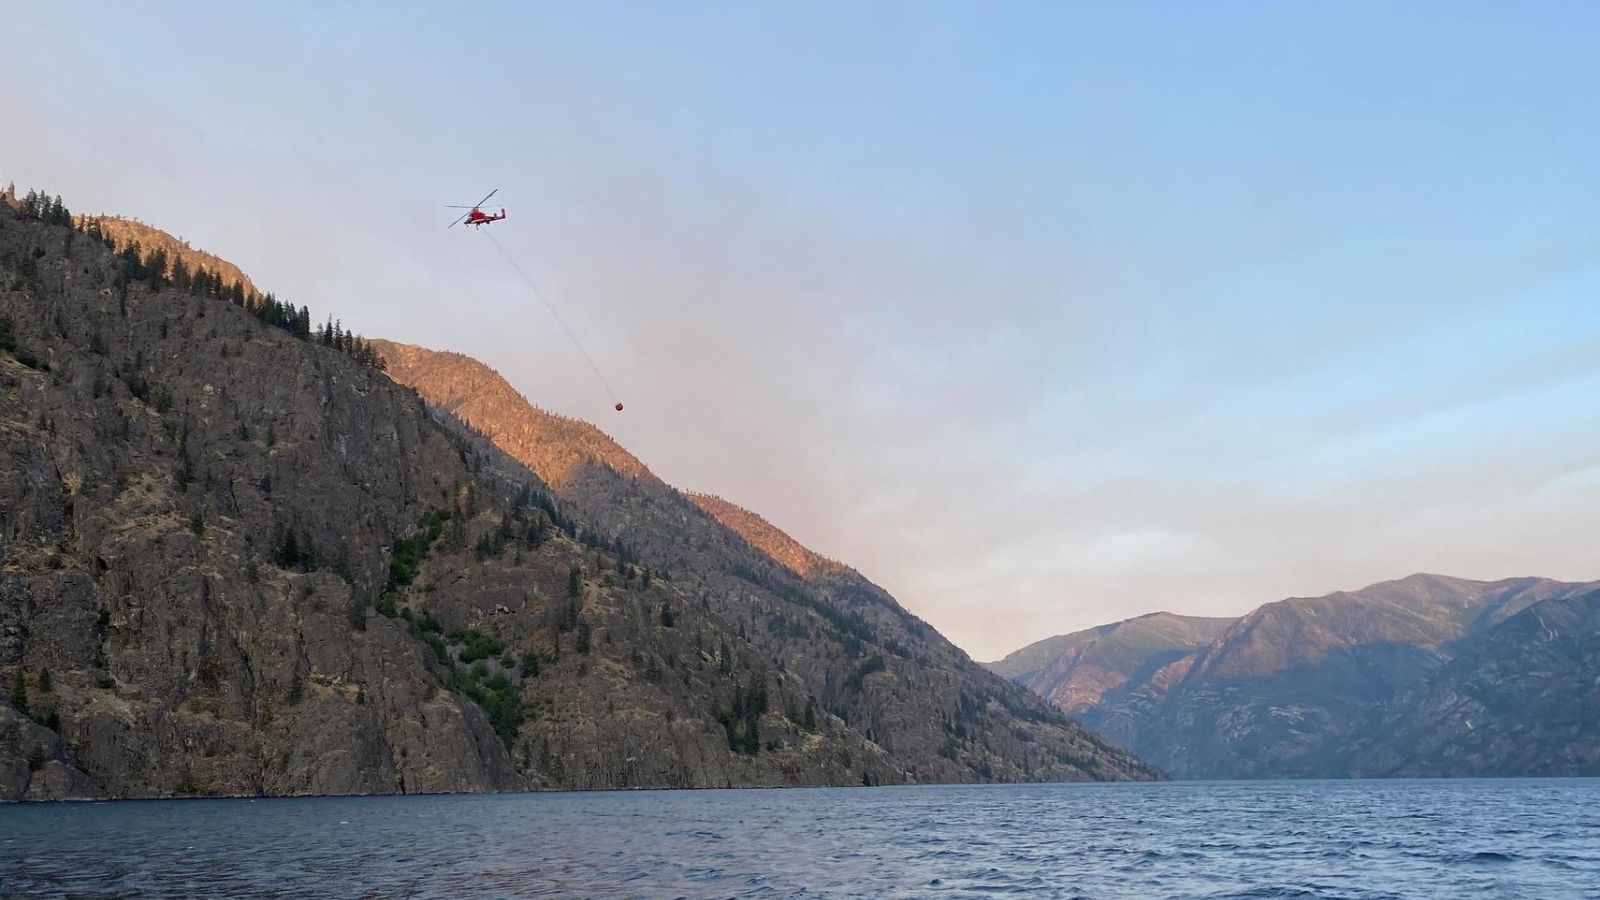 Protecting Stehekin, its citizens our top priority in Pioneer Fire